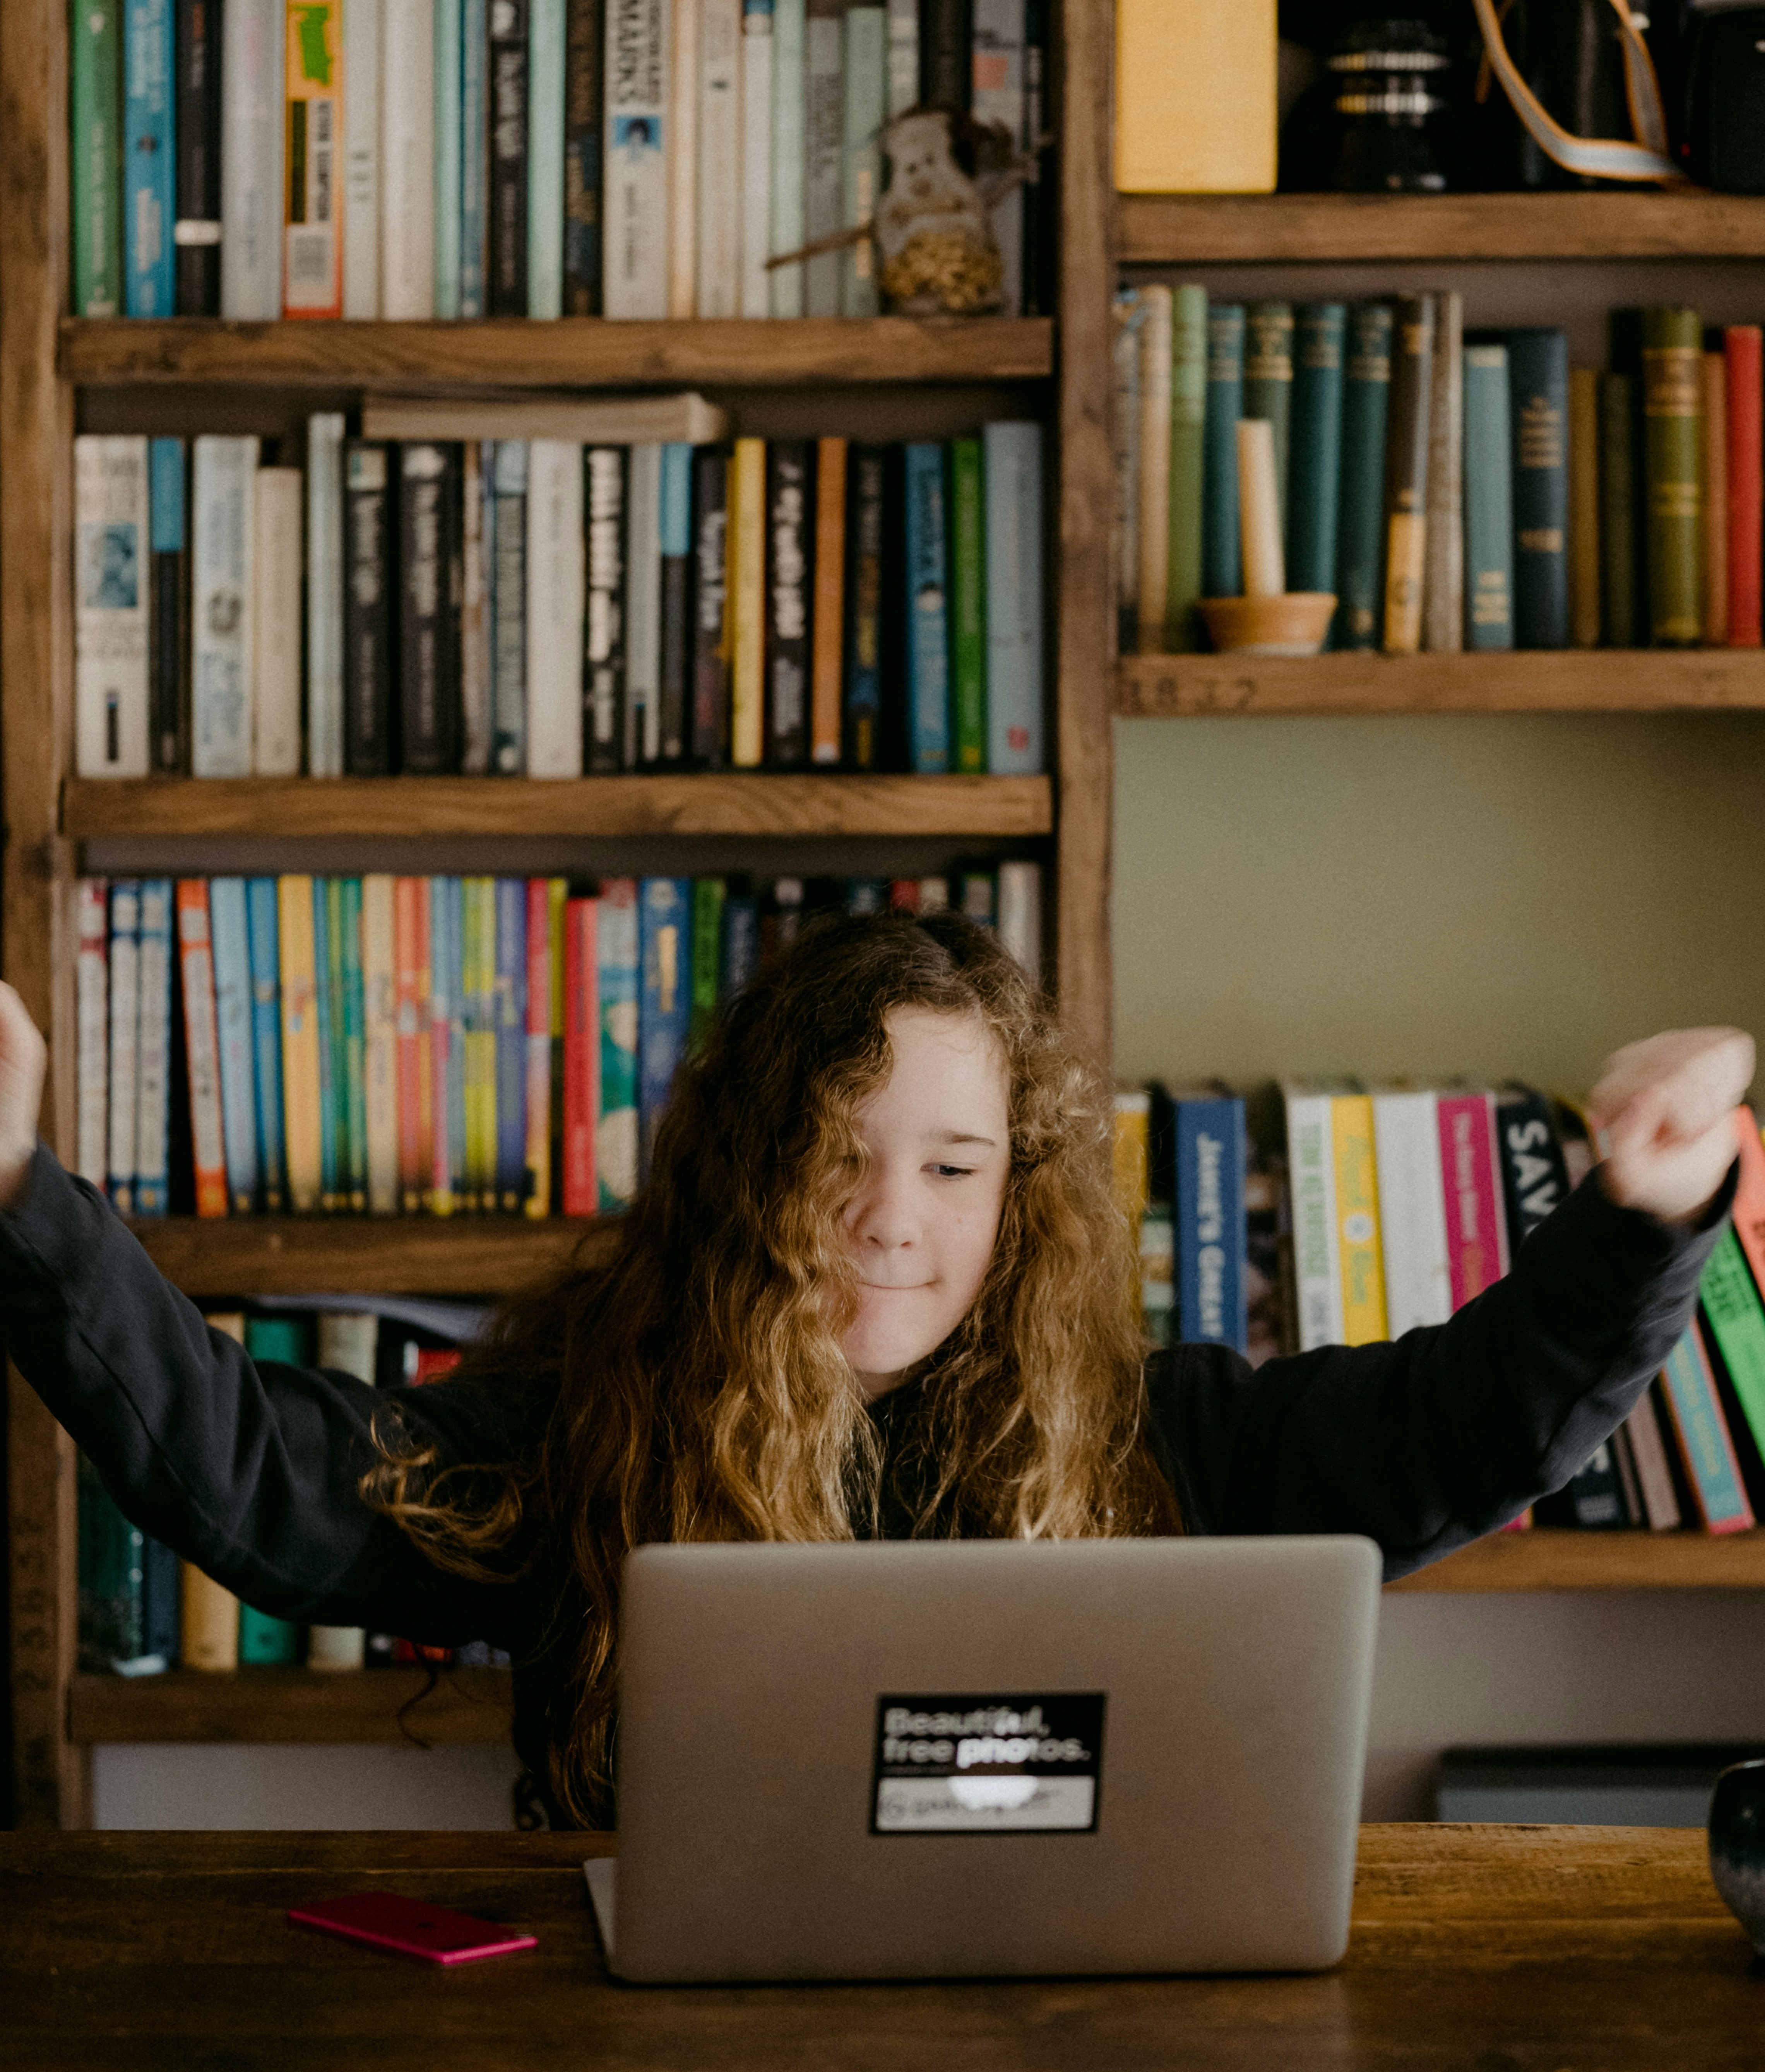 Girl sitting in front a computer pumping her arms in the air with a bookcase of books behind her